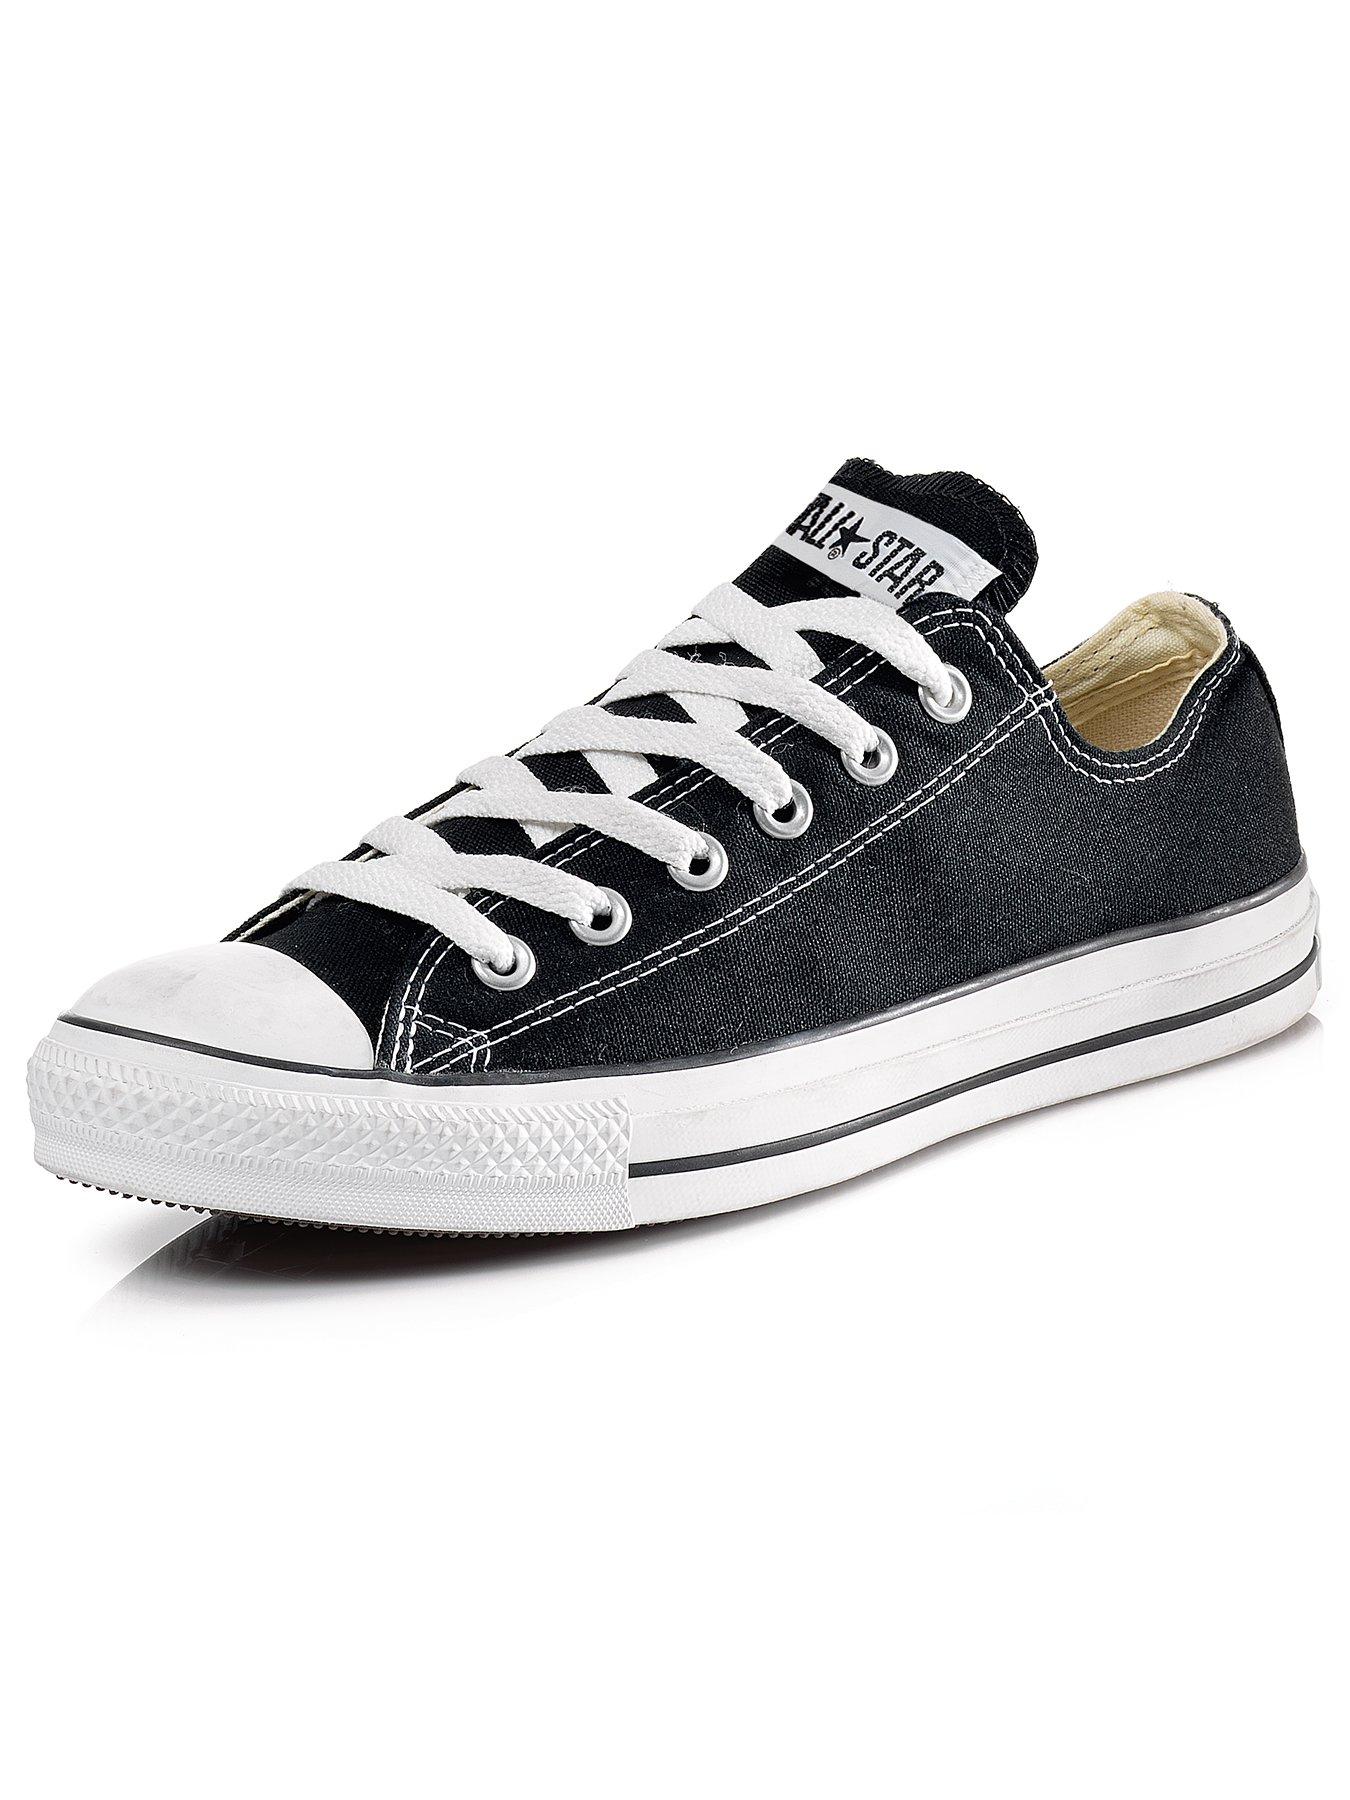 Converse Chuck Taylor All Star Ox | Trainers | Women | www.very.co.uk